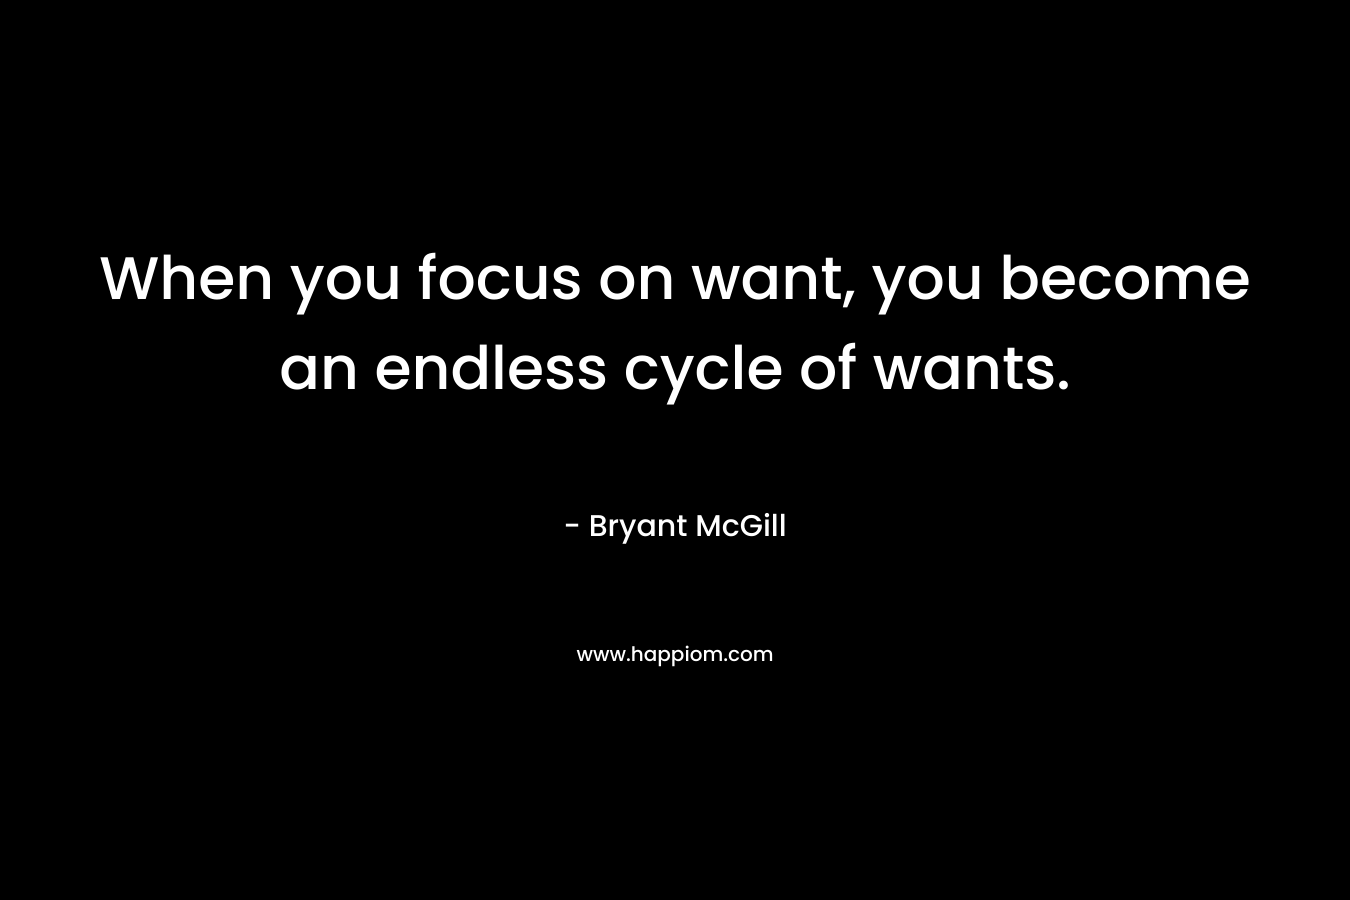 When you focus on want, you become an endless cycle of wants. – Bryant McGill